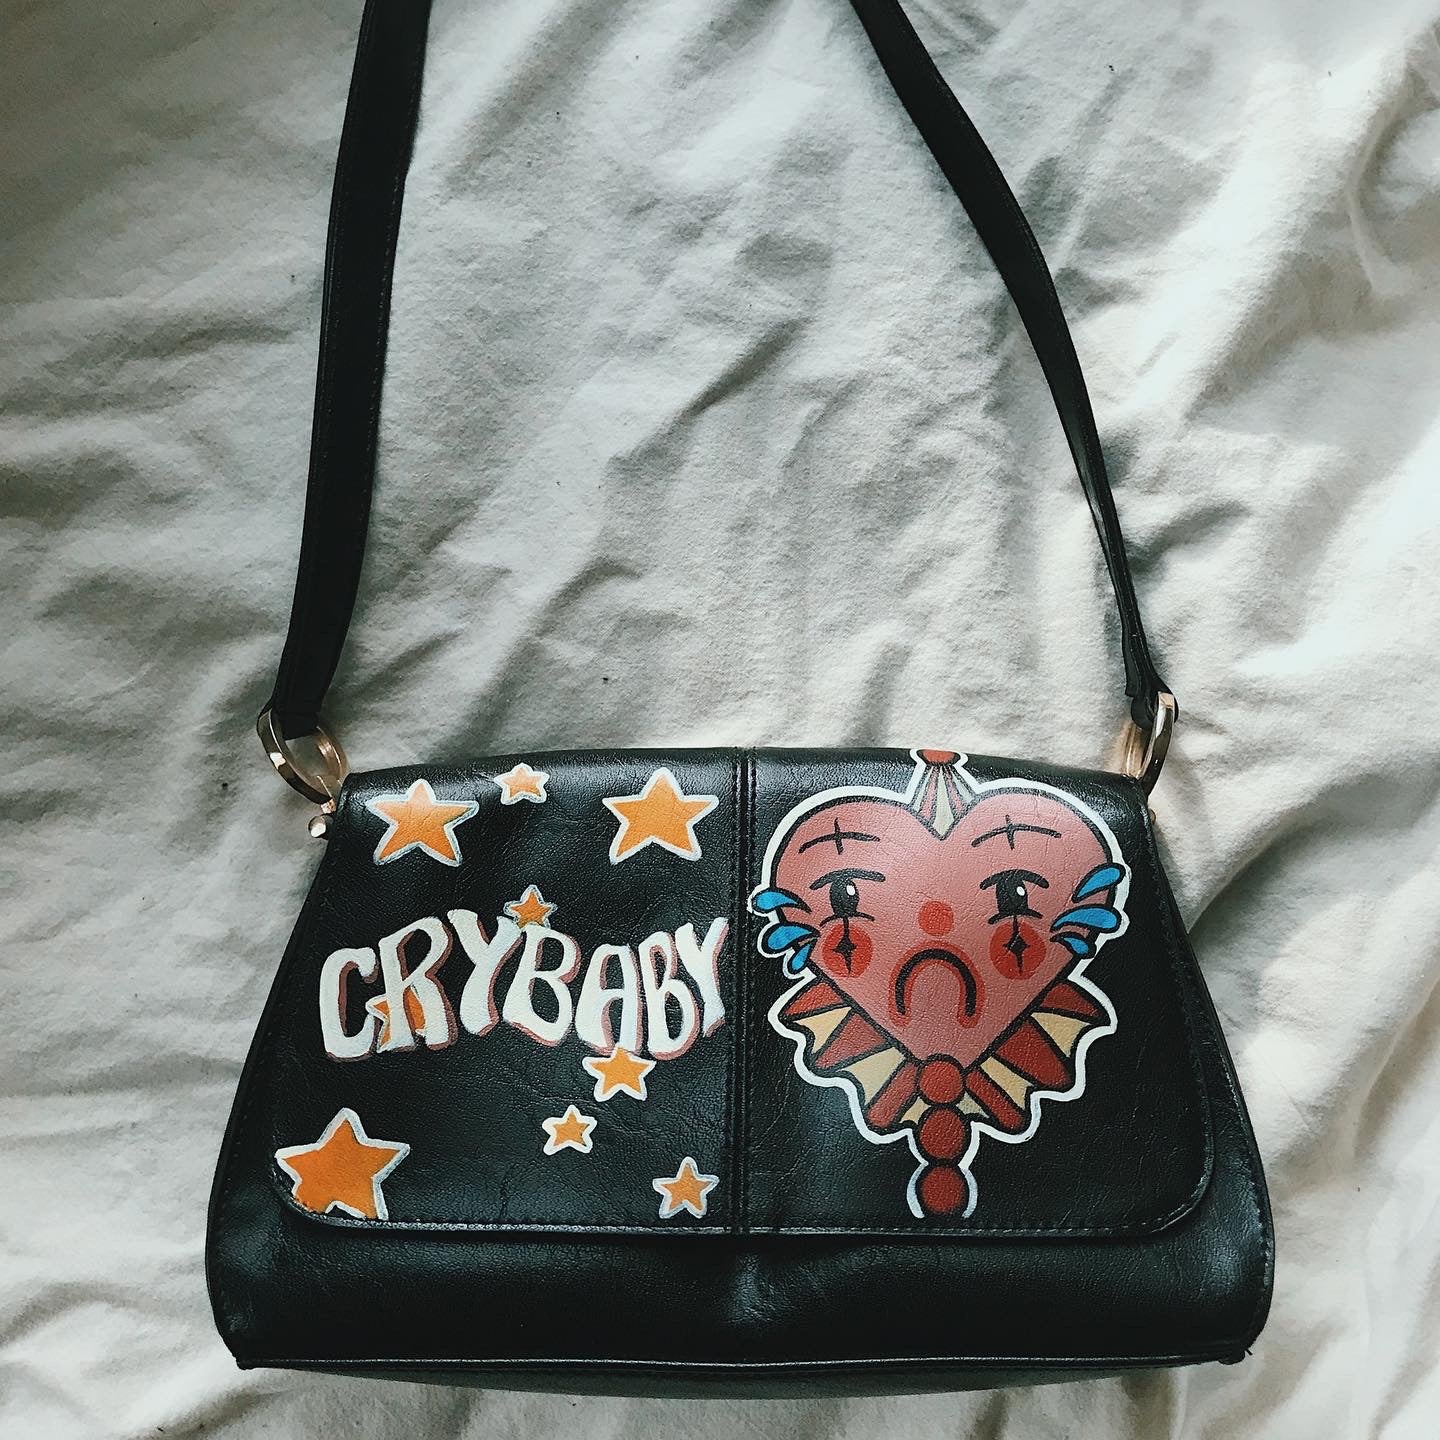 The Crybaby Bag